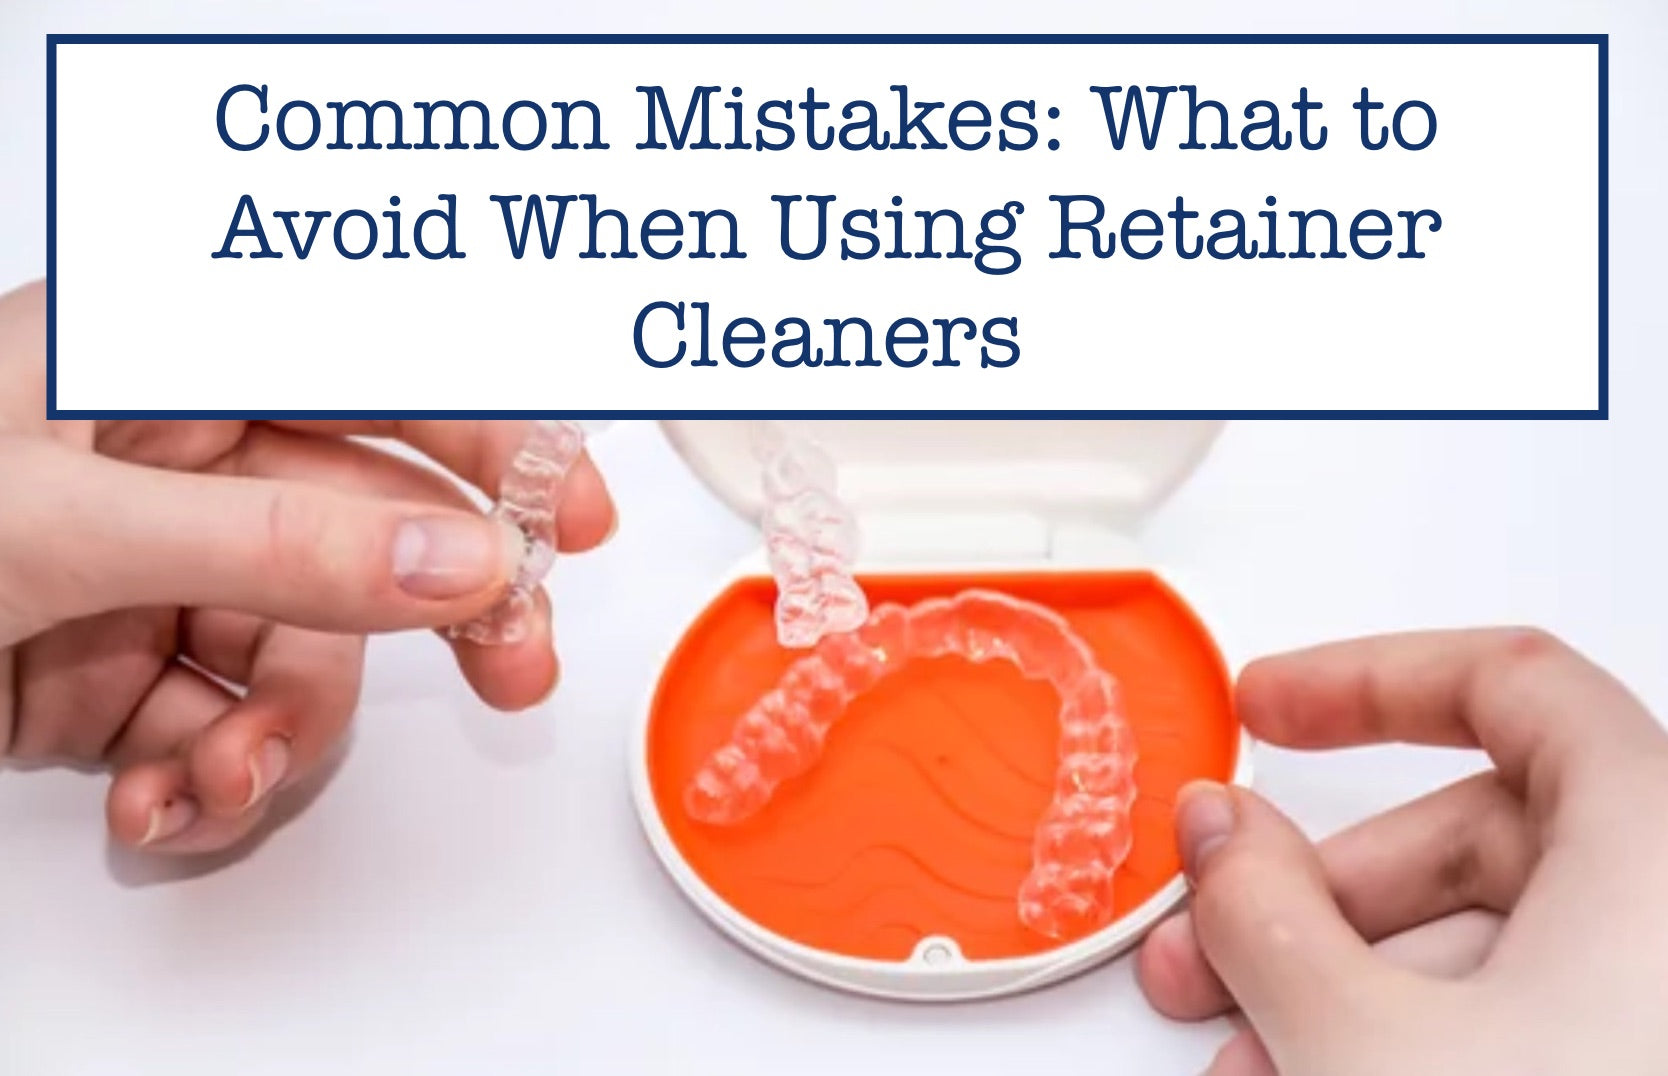 Common Mistakes: What to Avoid When Using Retainer Cleaners